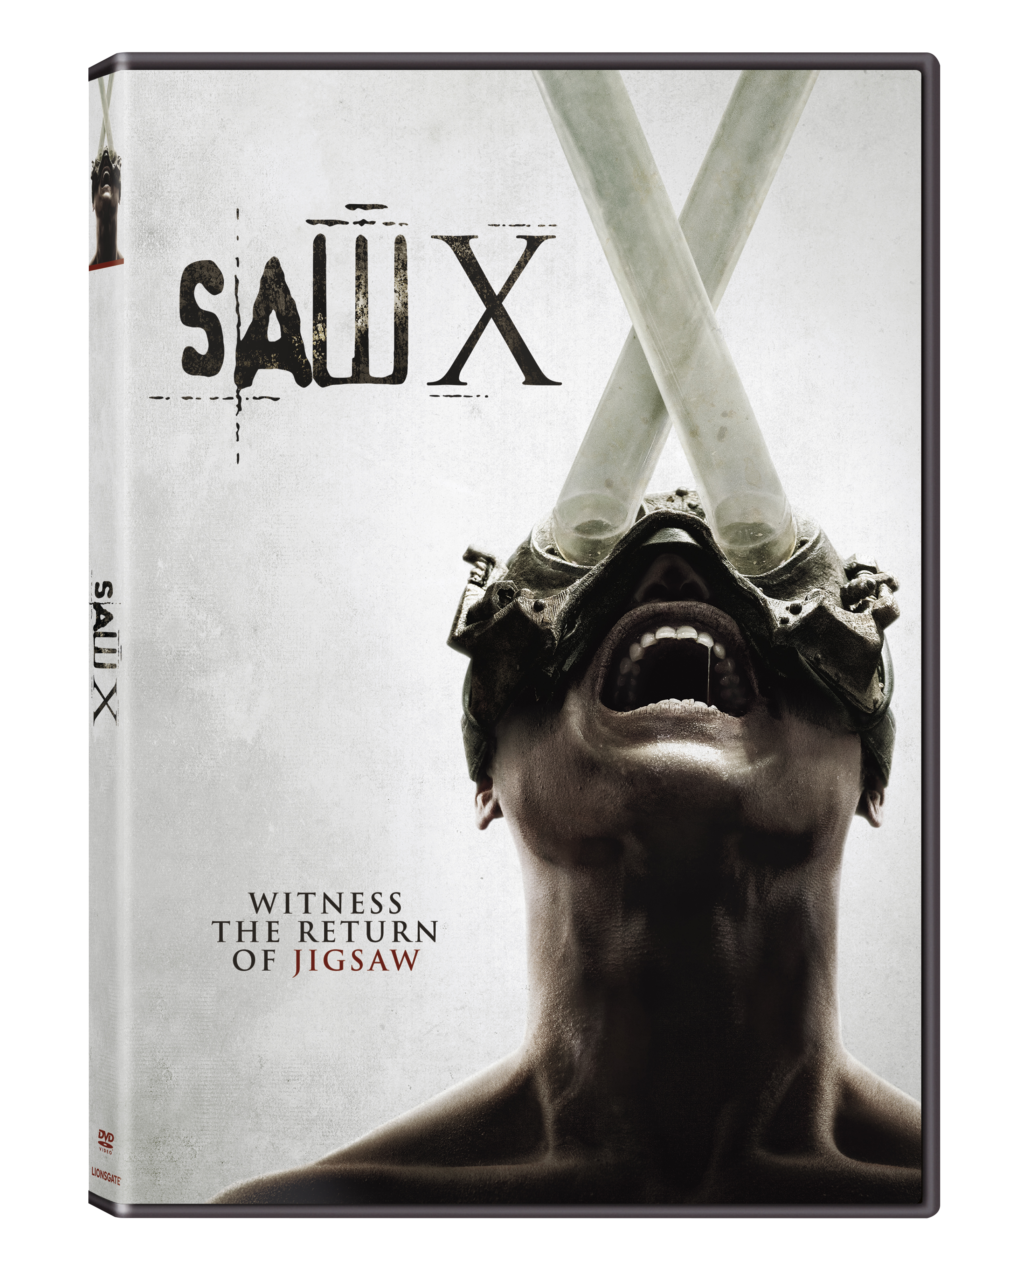 Saw X DVD cover (Lionsgate)